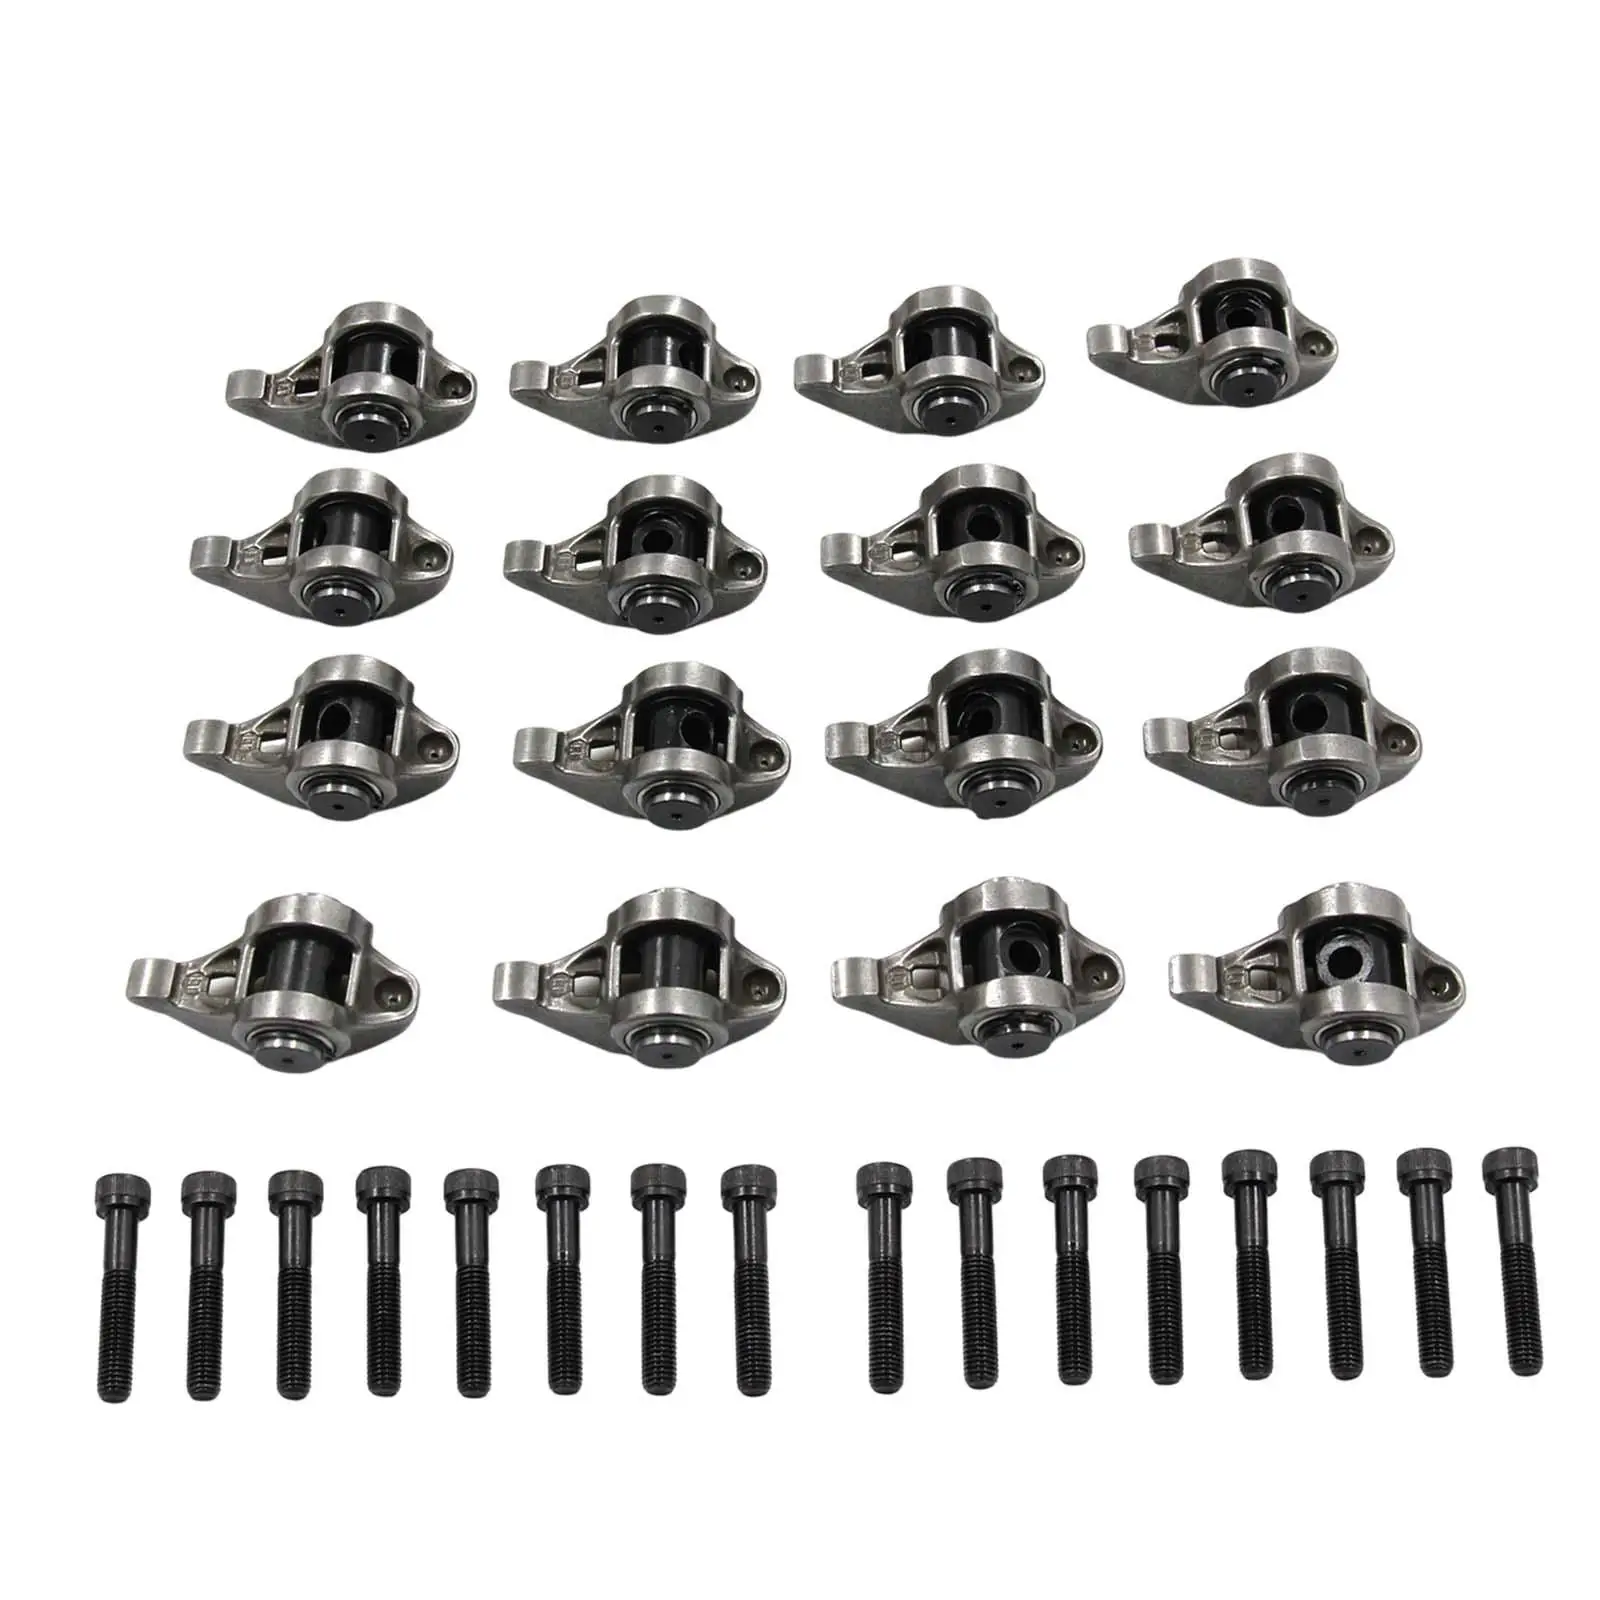 16x Rocker Arms and Bolts with Trunion Kit for Chevrolet LS1 LS2 LS6